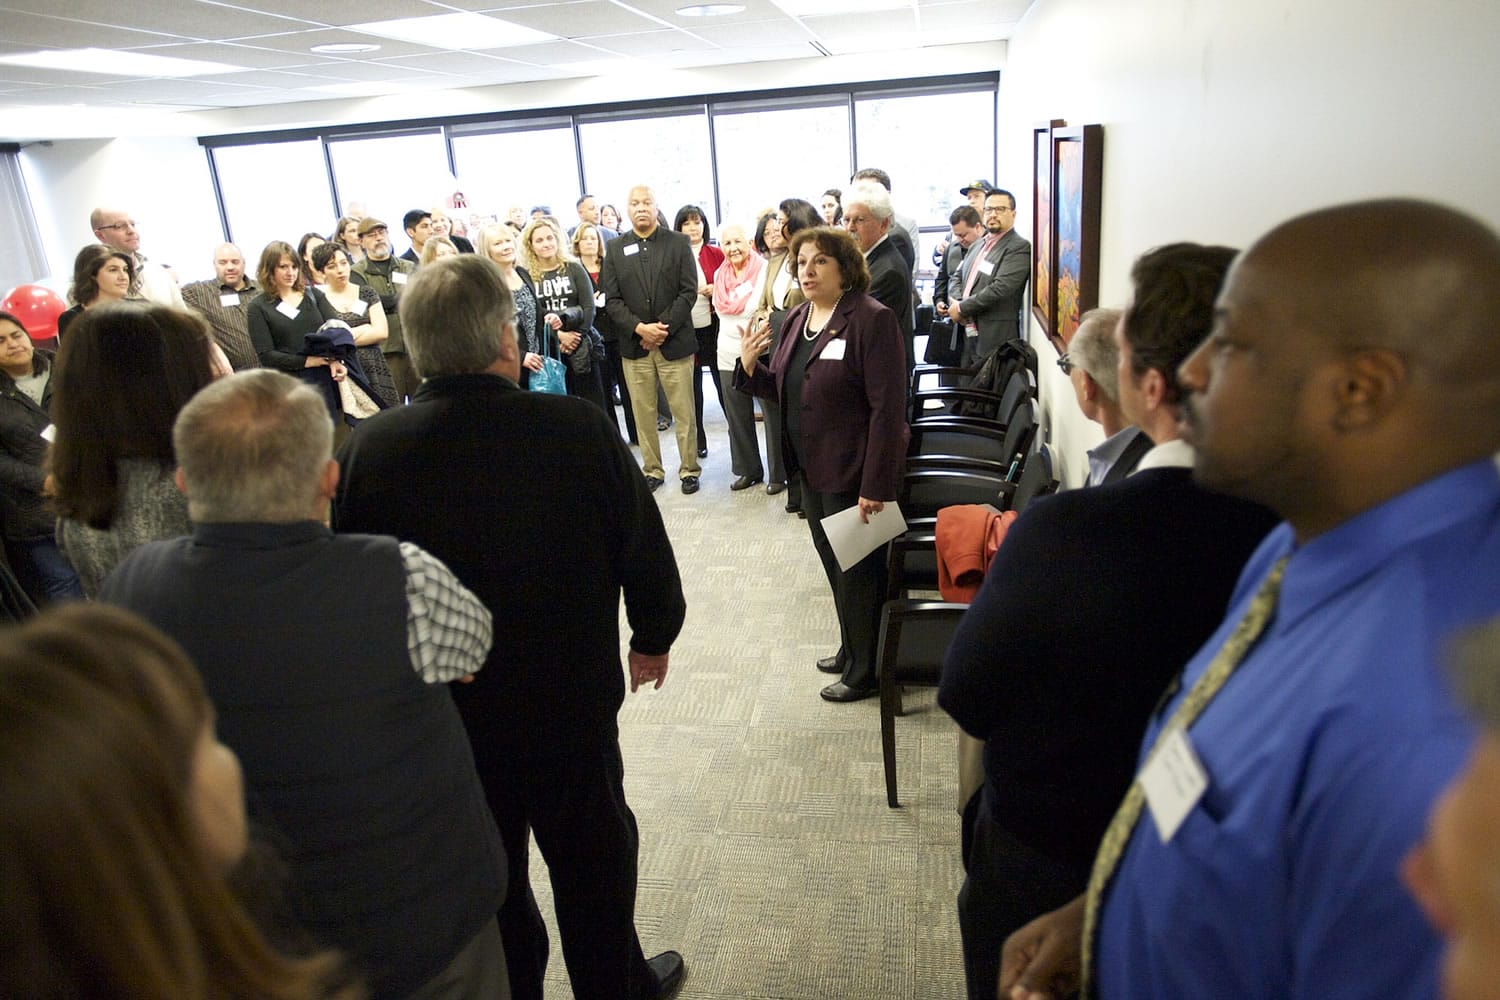 Gale Castillo, center, president of the Portland-based Hispanic Metropolitan Chamber, welcomes guests at an open house for the chamber's new office in the 805 Broadway Building in downtown Vancouver.